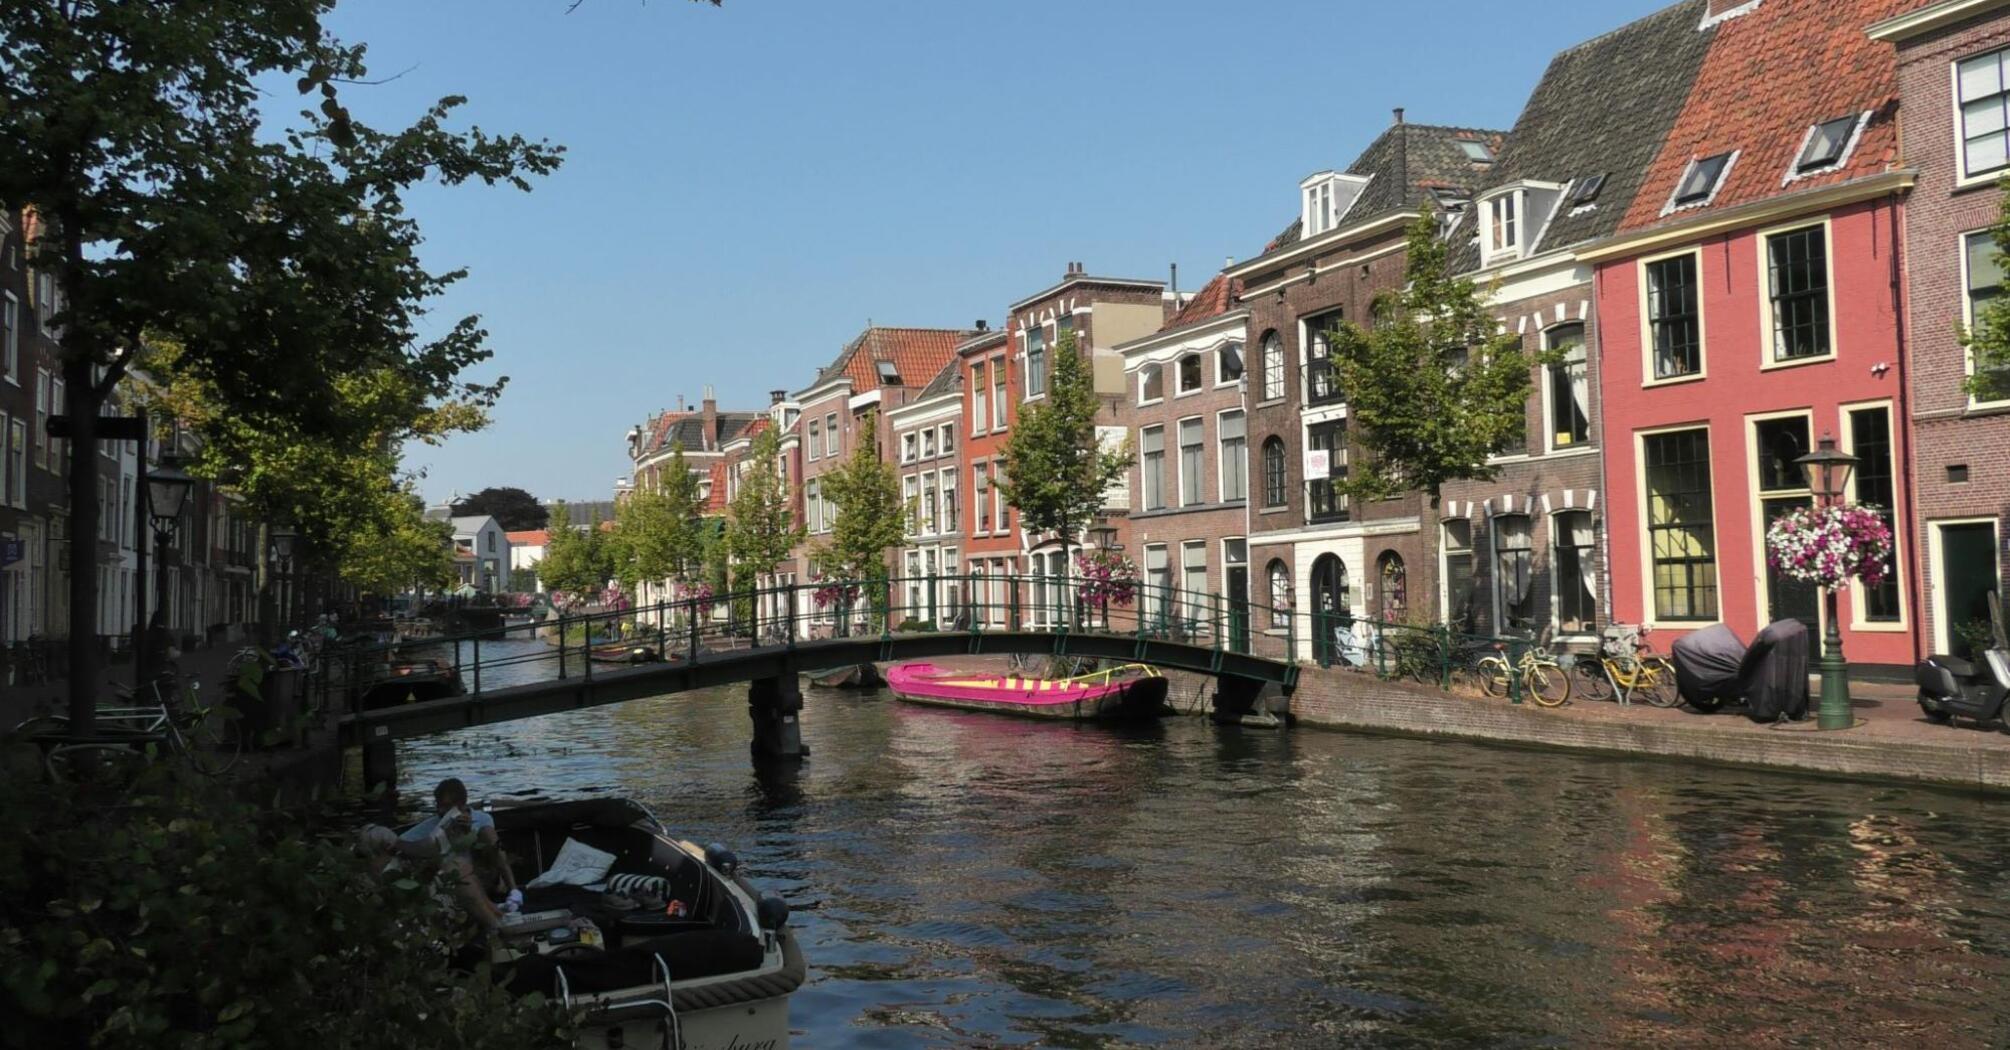 The boats in the cannal in Leiden